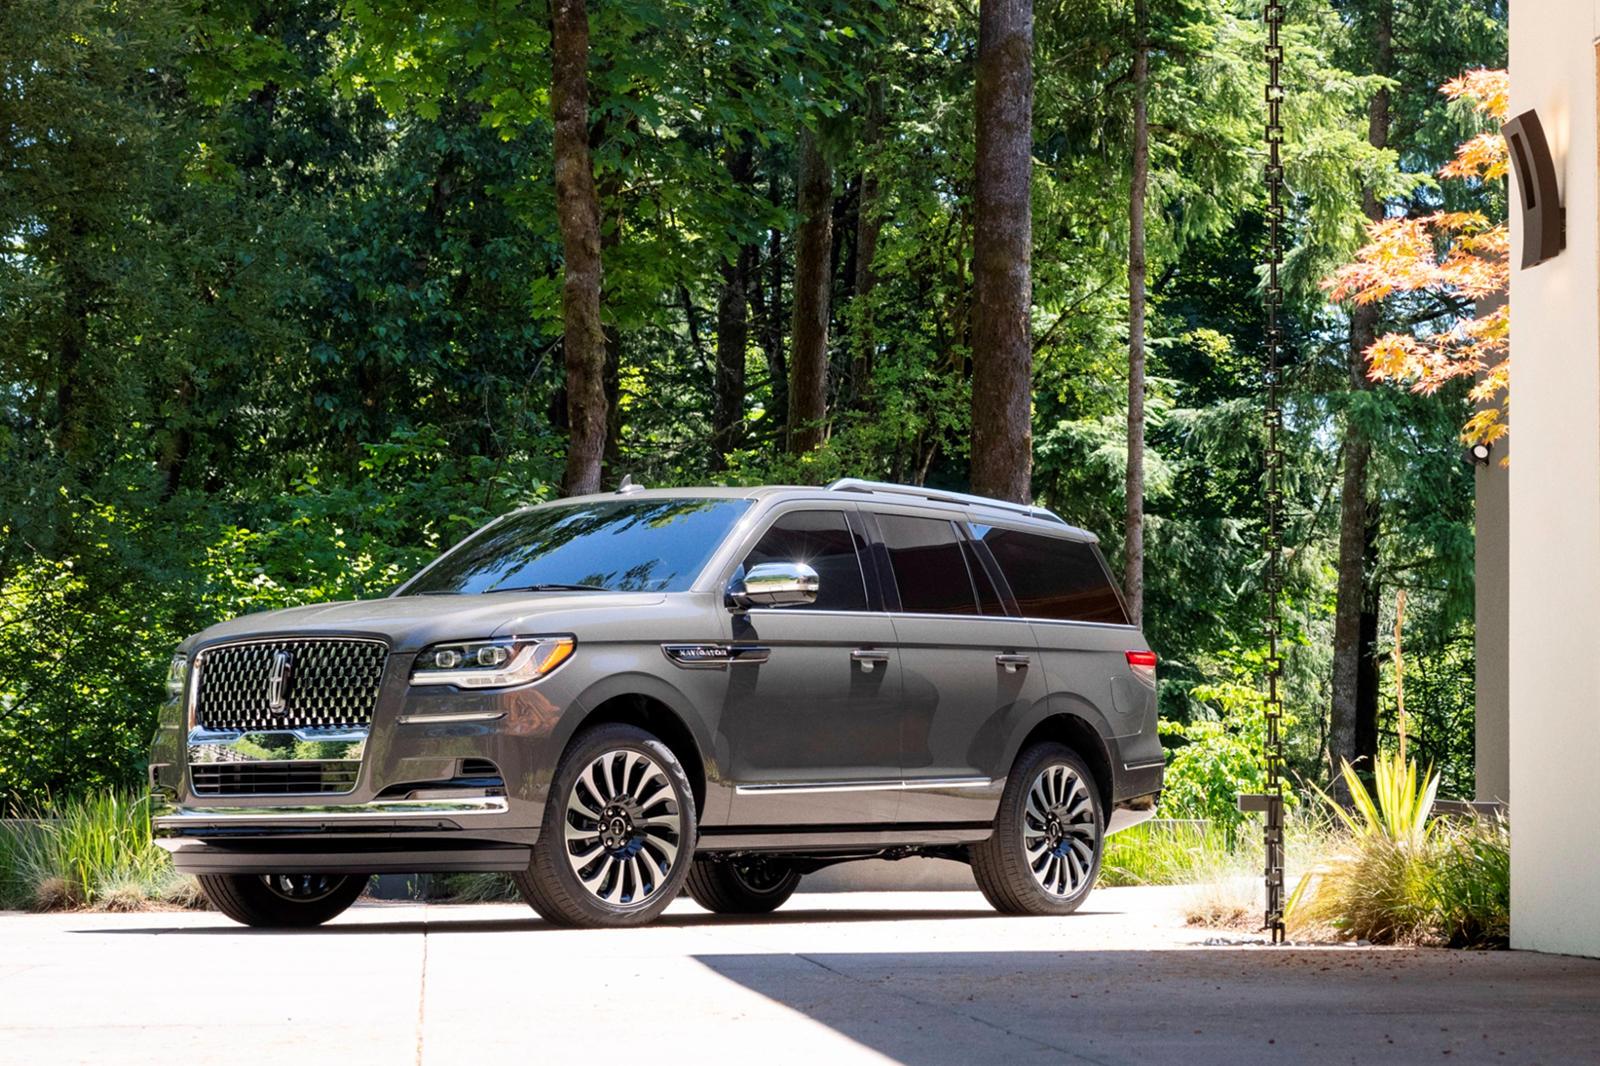 2022 Lincoln Navigator Review: Pricing, Specs & Photos